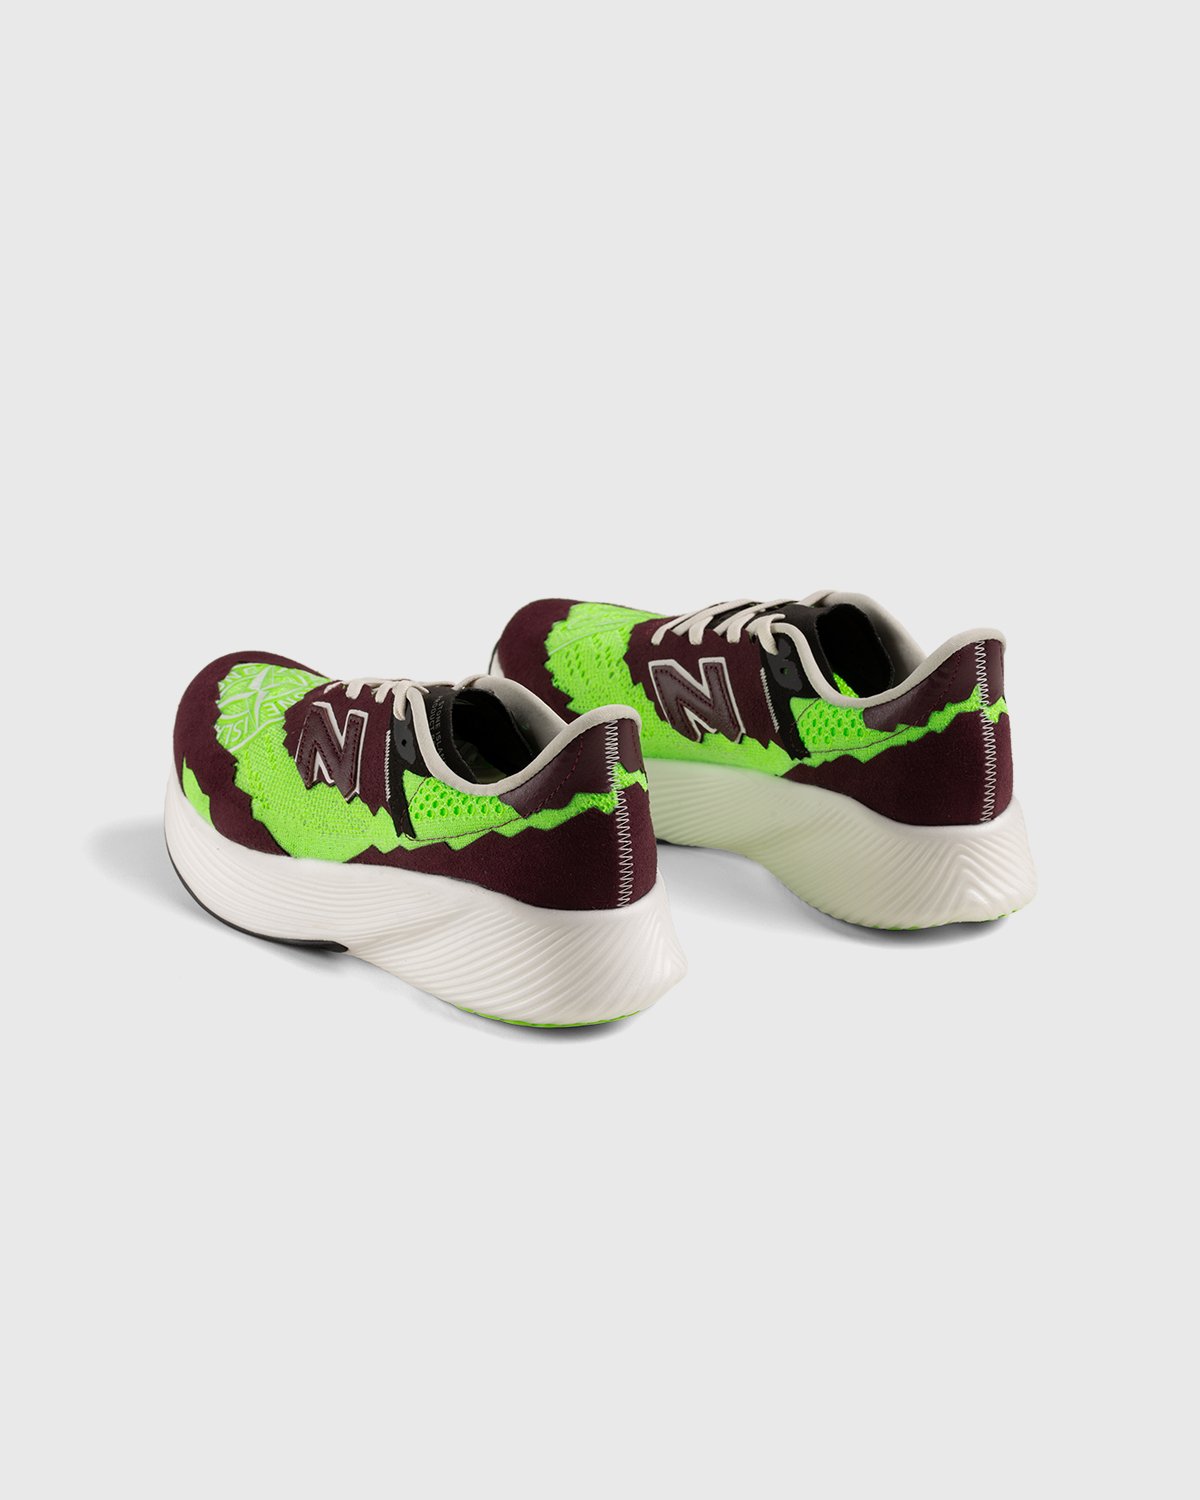 New Balance x Stone Island - FuelCell RC Elite v2 Energy Lime - Footwear - Green - Image 3